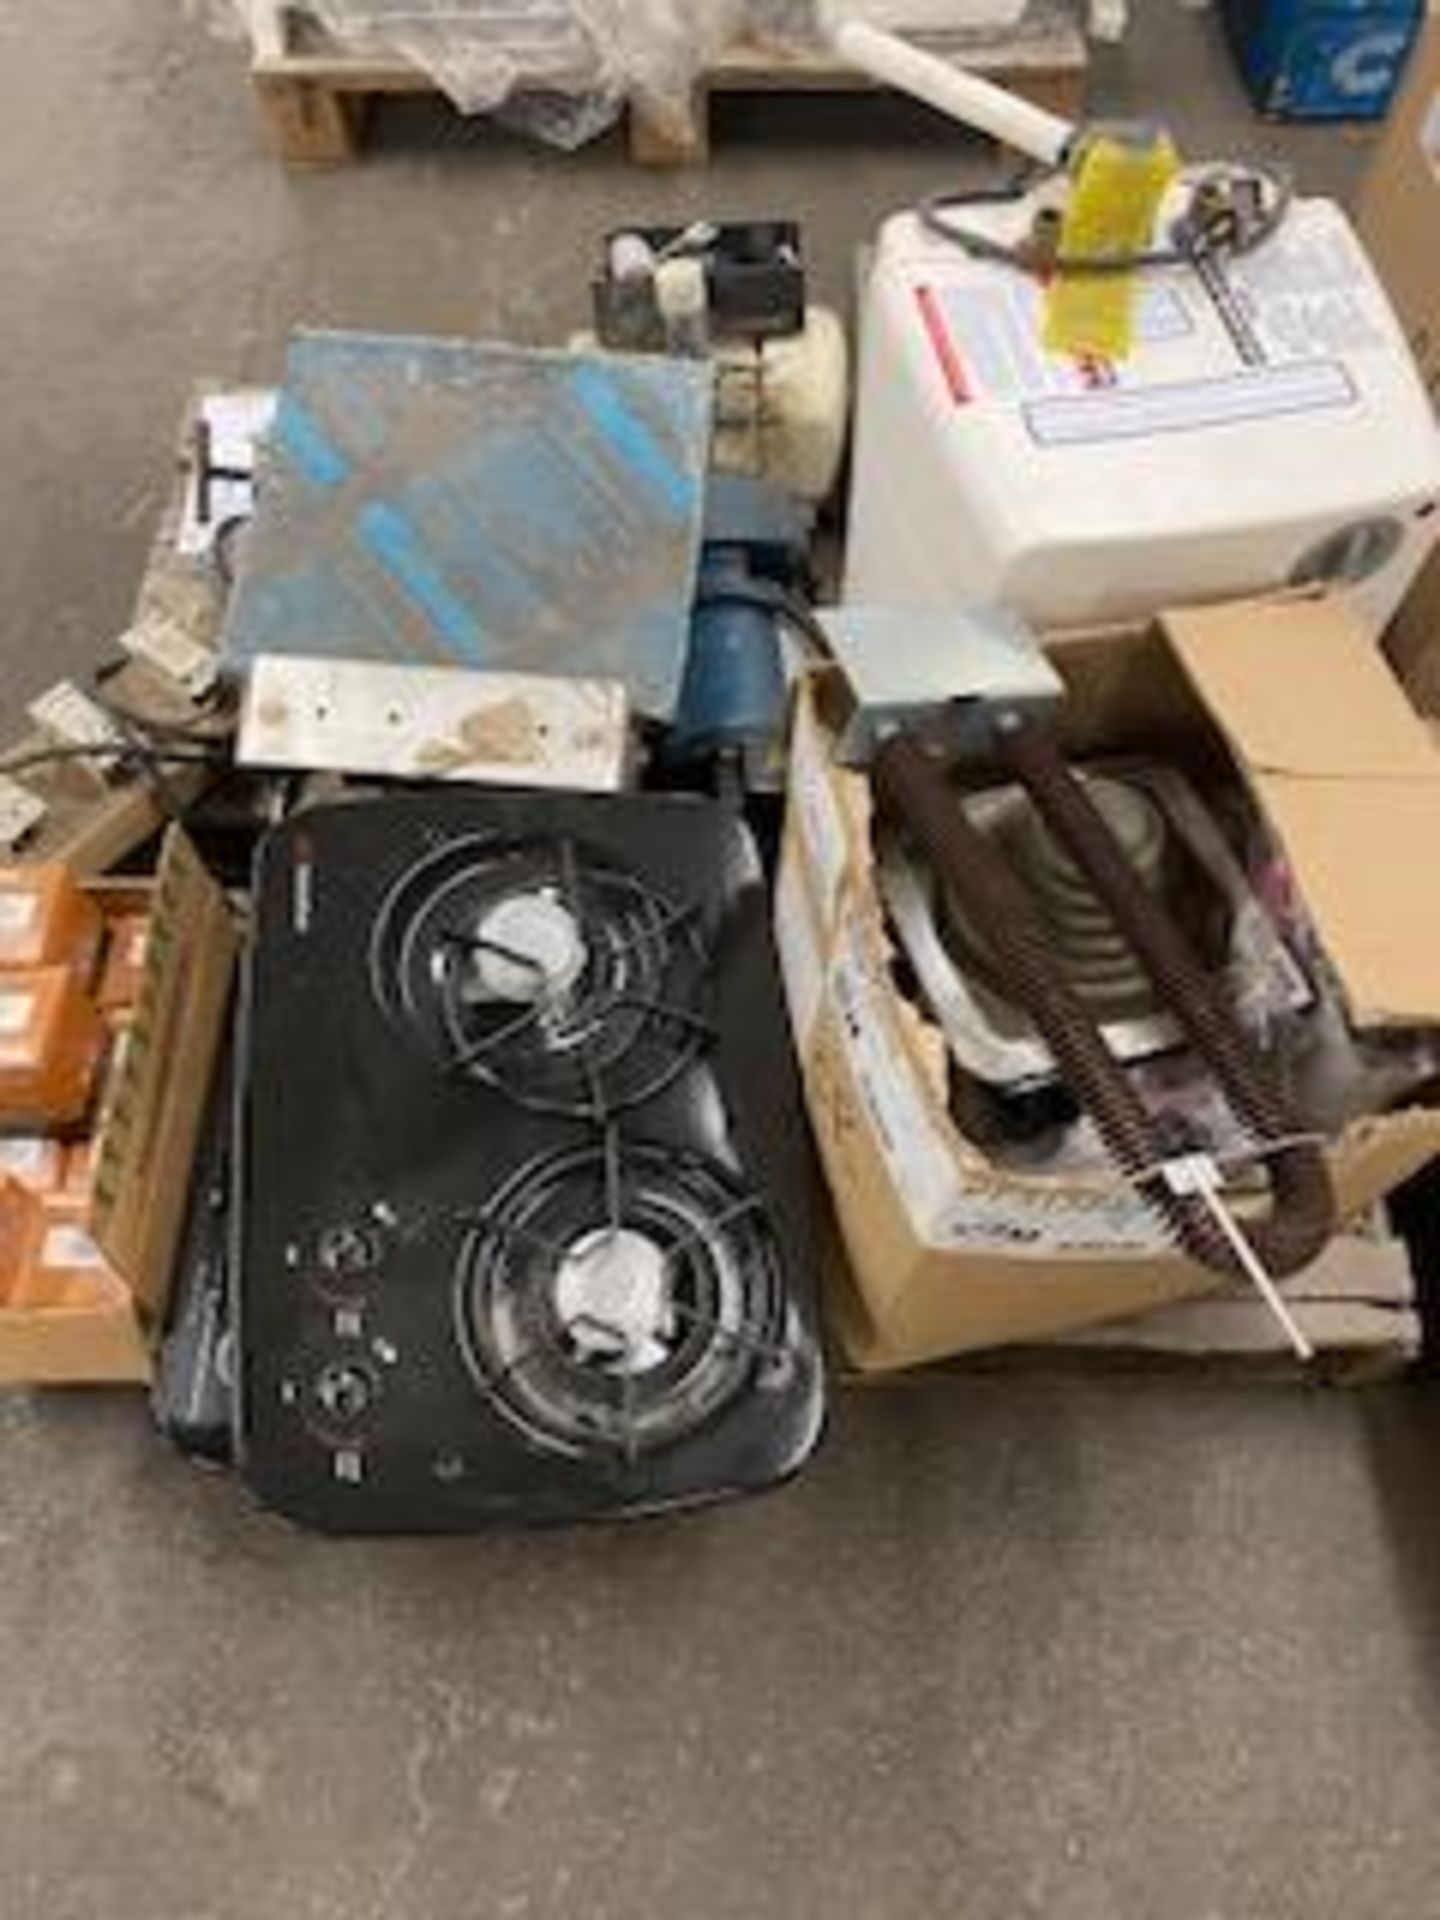 HOT PLATES, PORTABLE HEATER AND OTHER MISC. ITEMS - Image 2 of 2